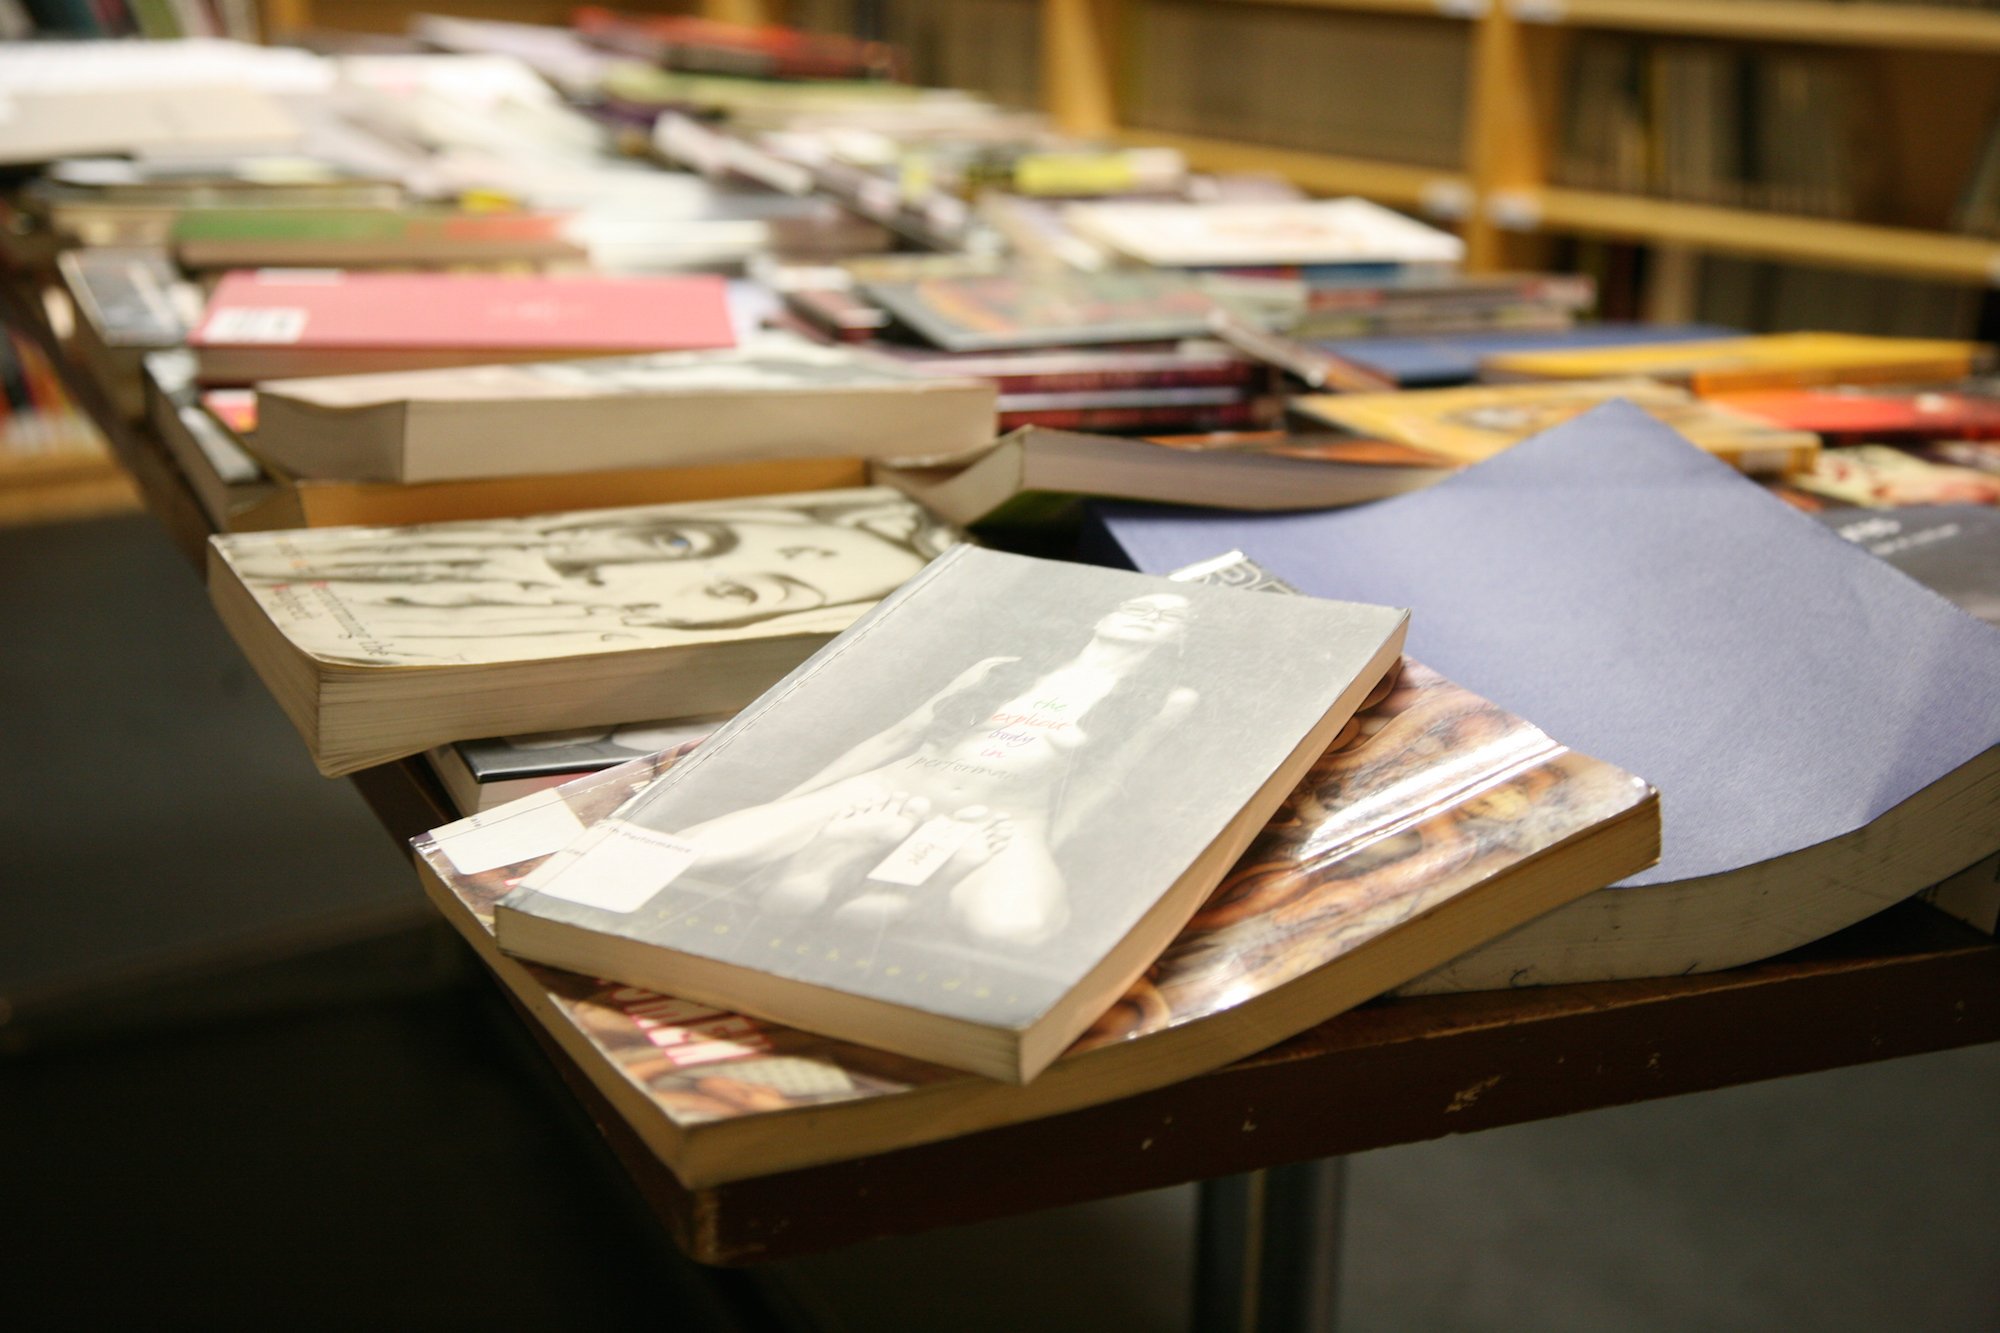 Books are piled on a table.